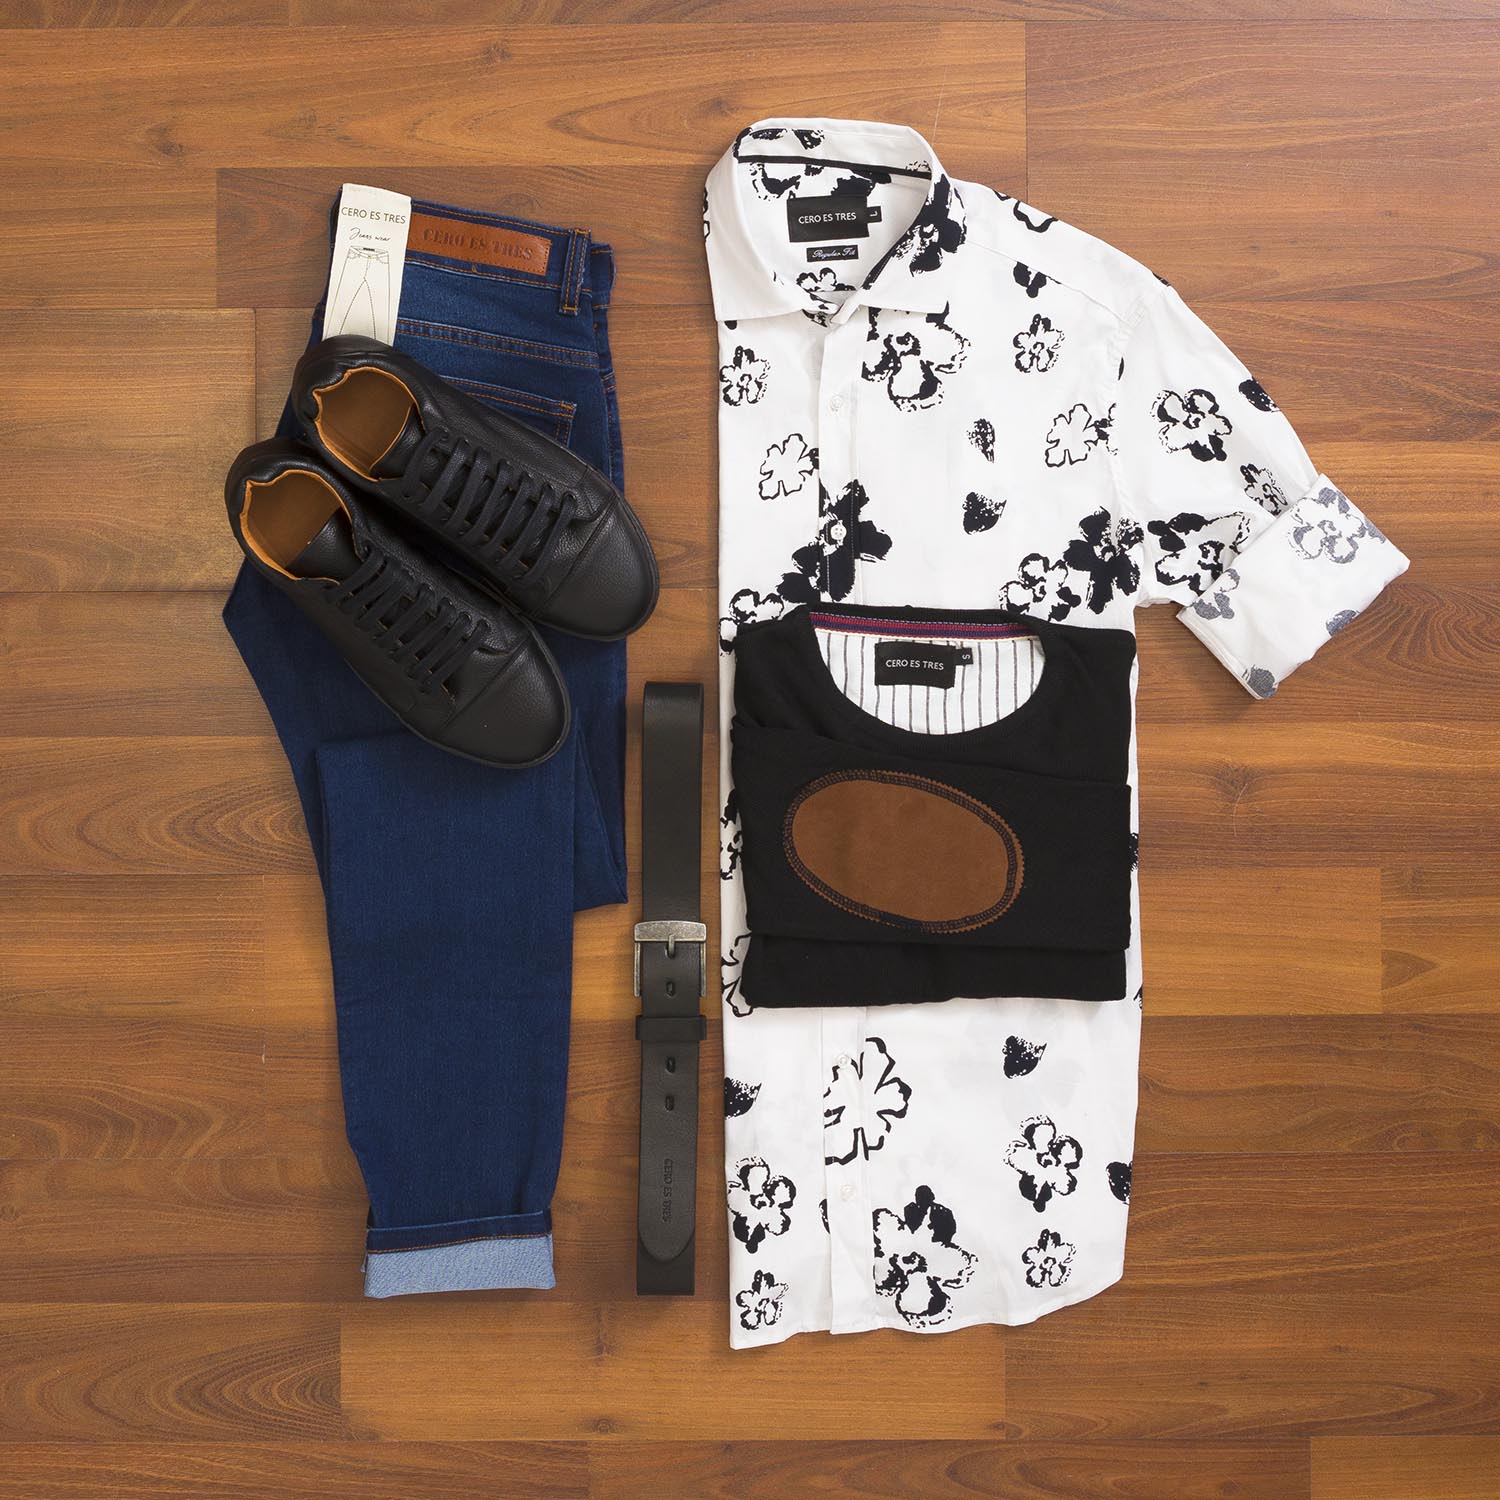 OUTFIT CERO 302